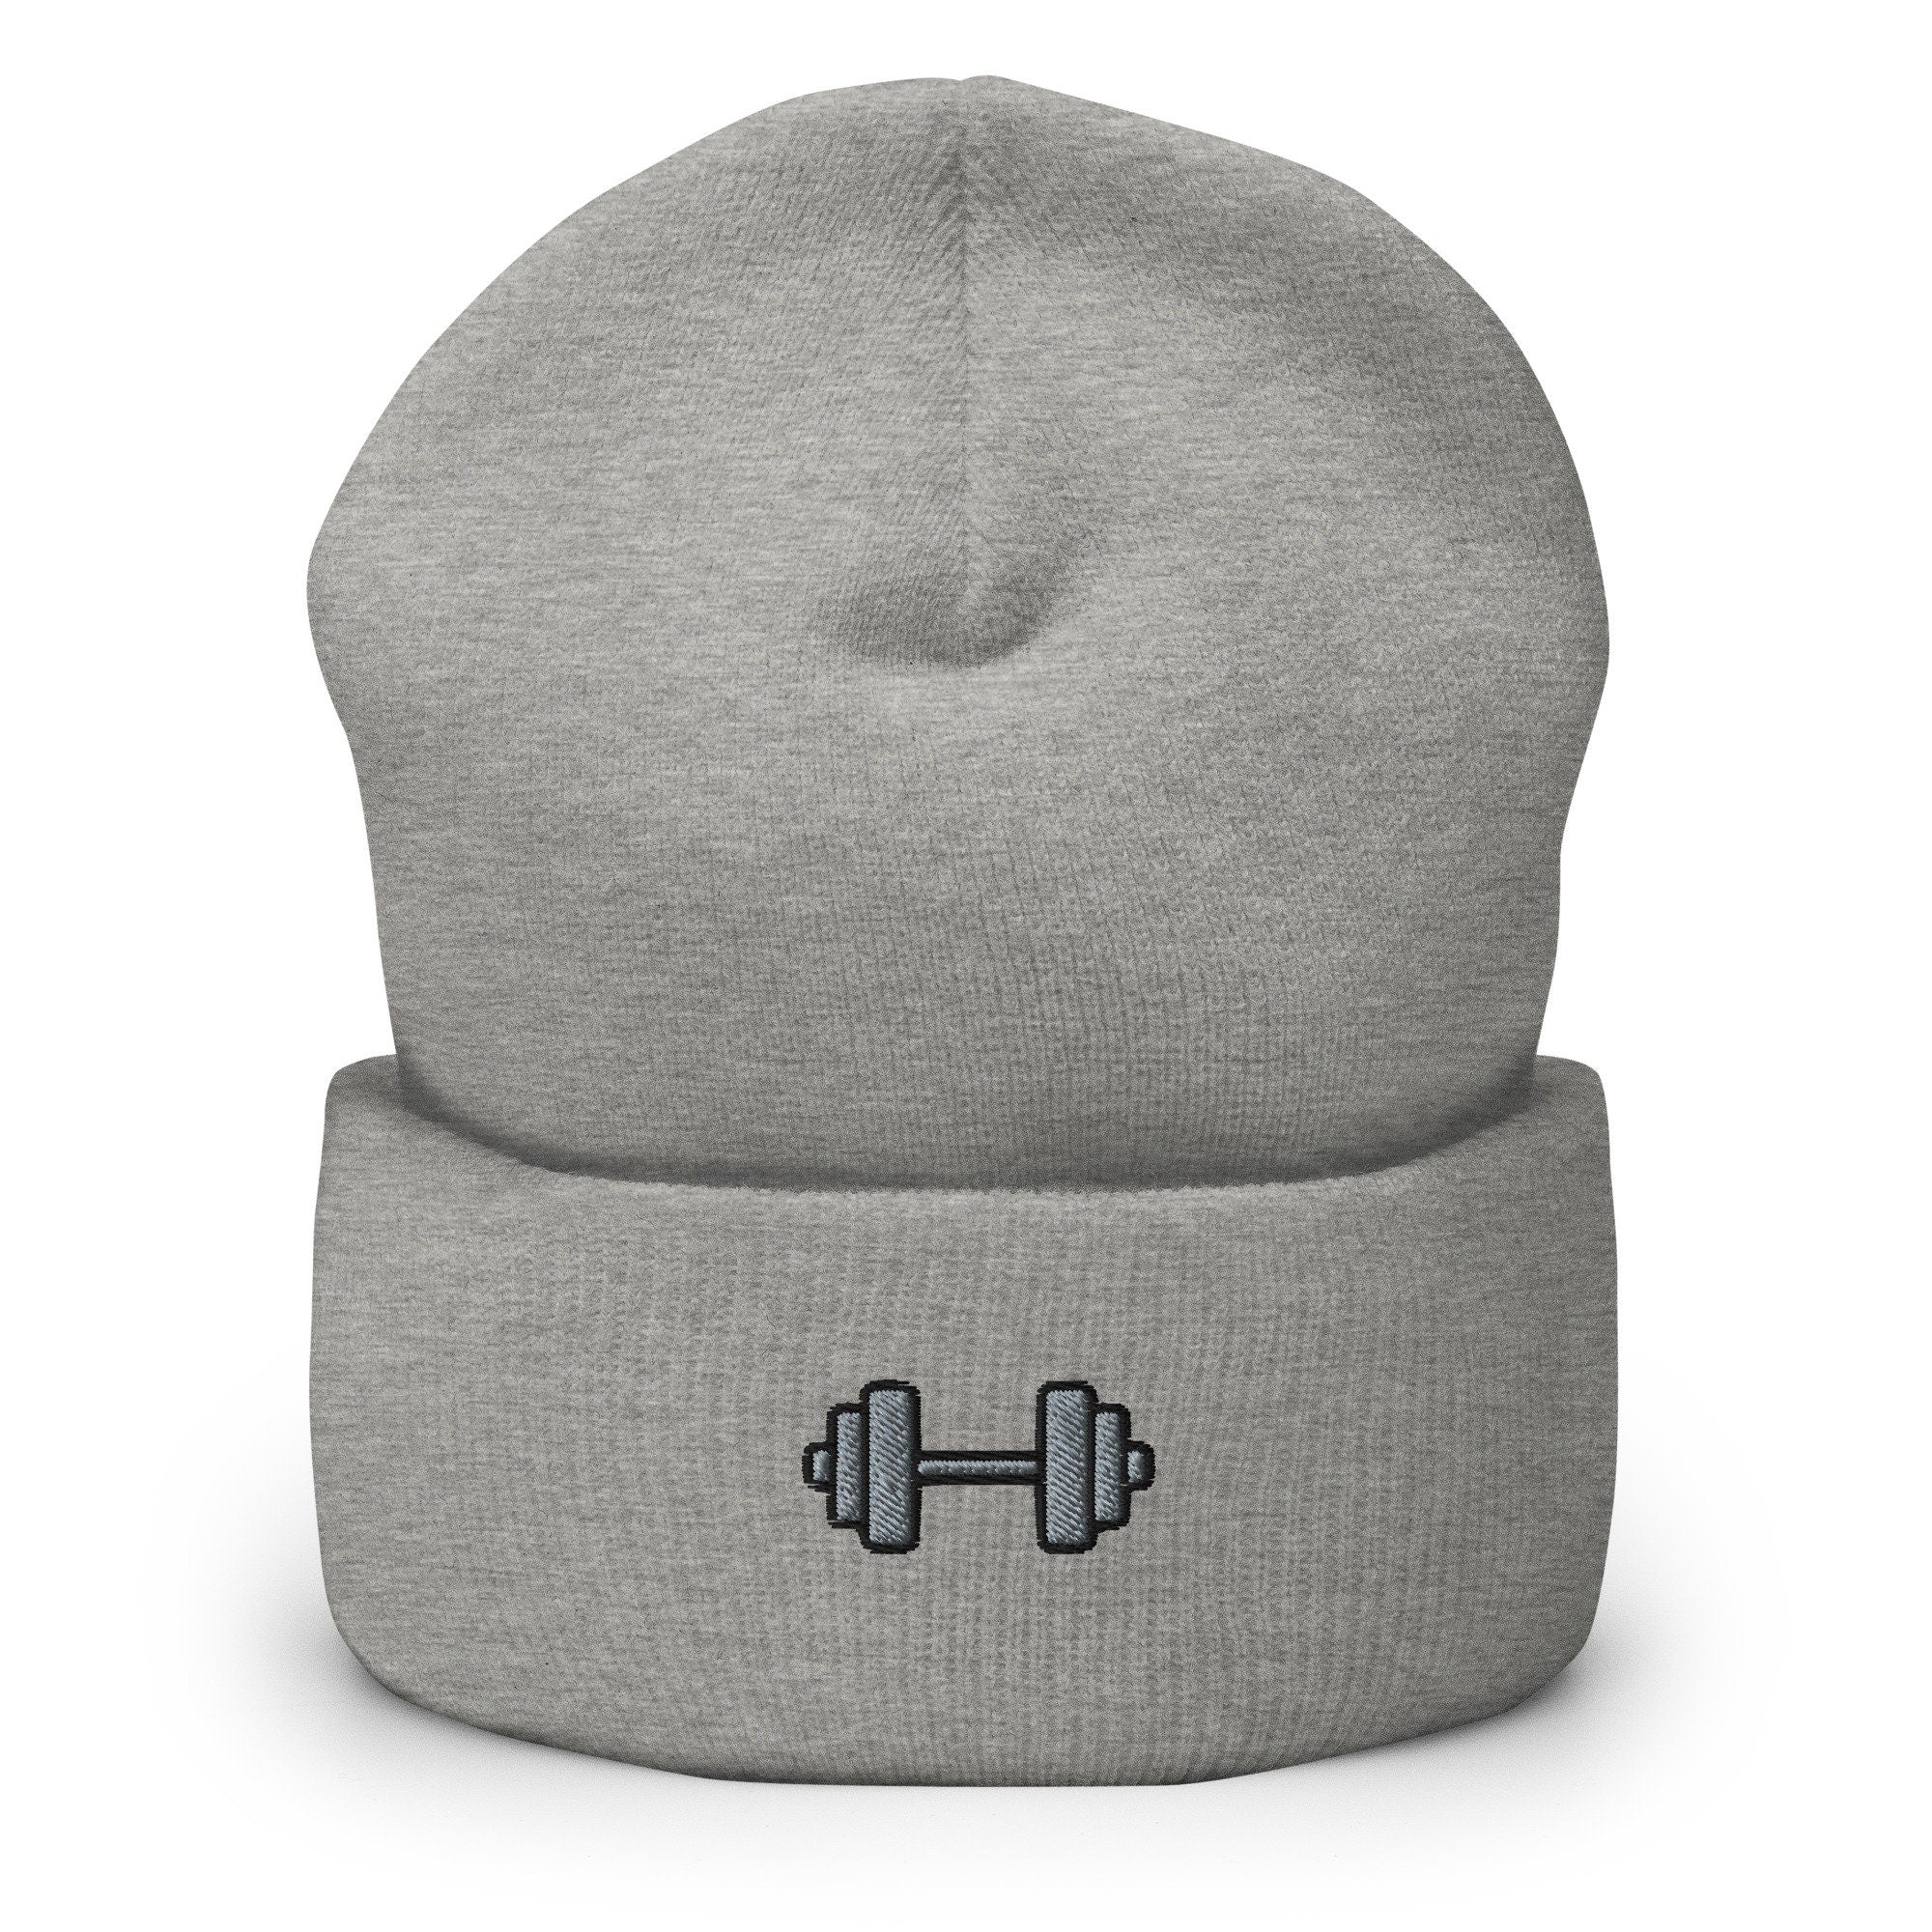 Dumbbell Weightlifting Body Building Embroidered Beanie, Handmade Cuffed Knit Unisex Slouchy Adult Winter Hat Cap Gift